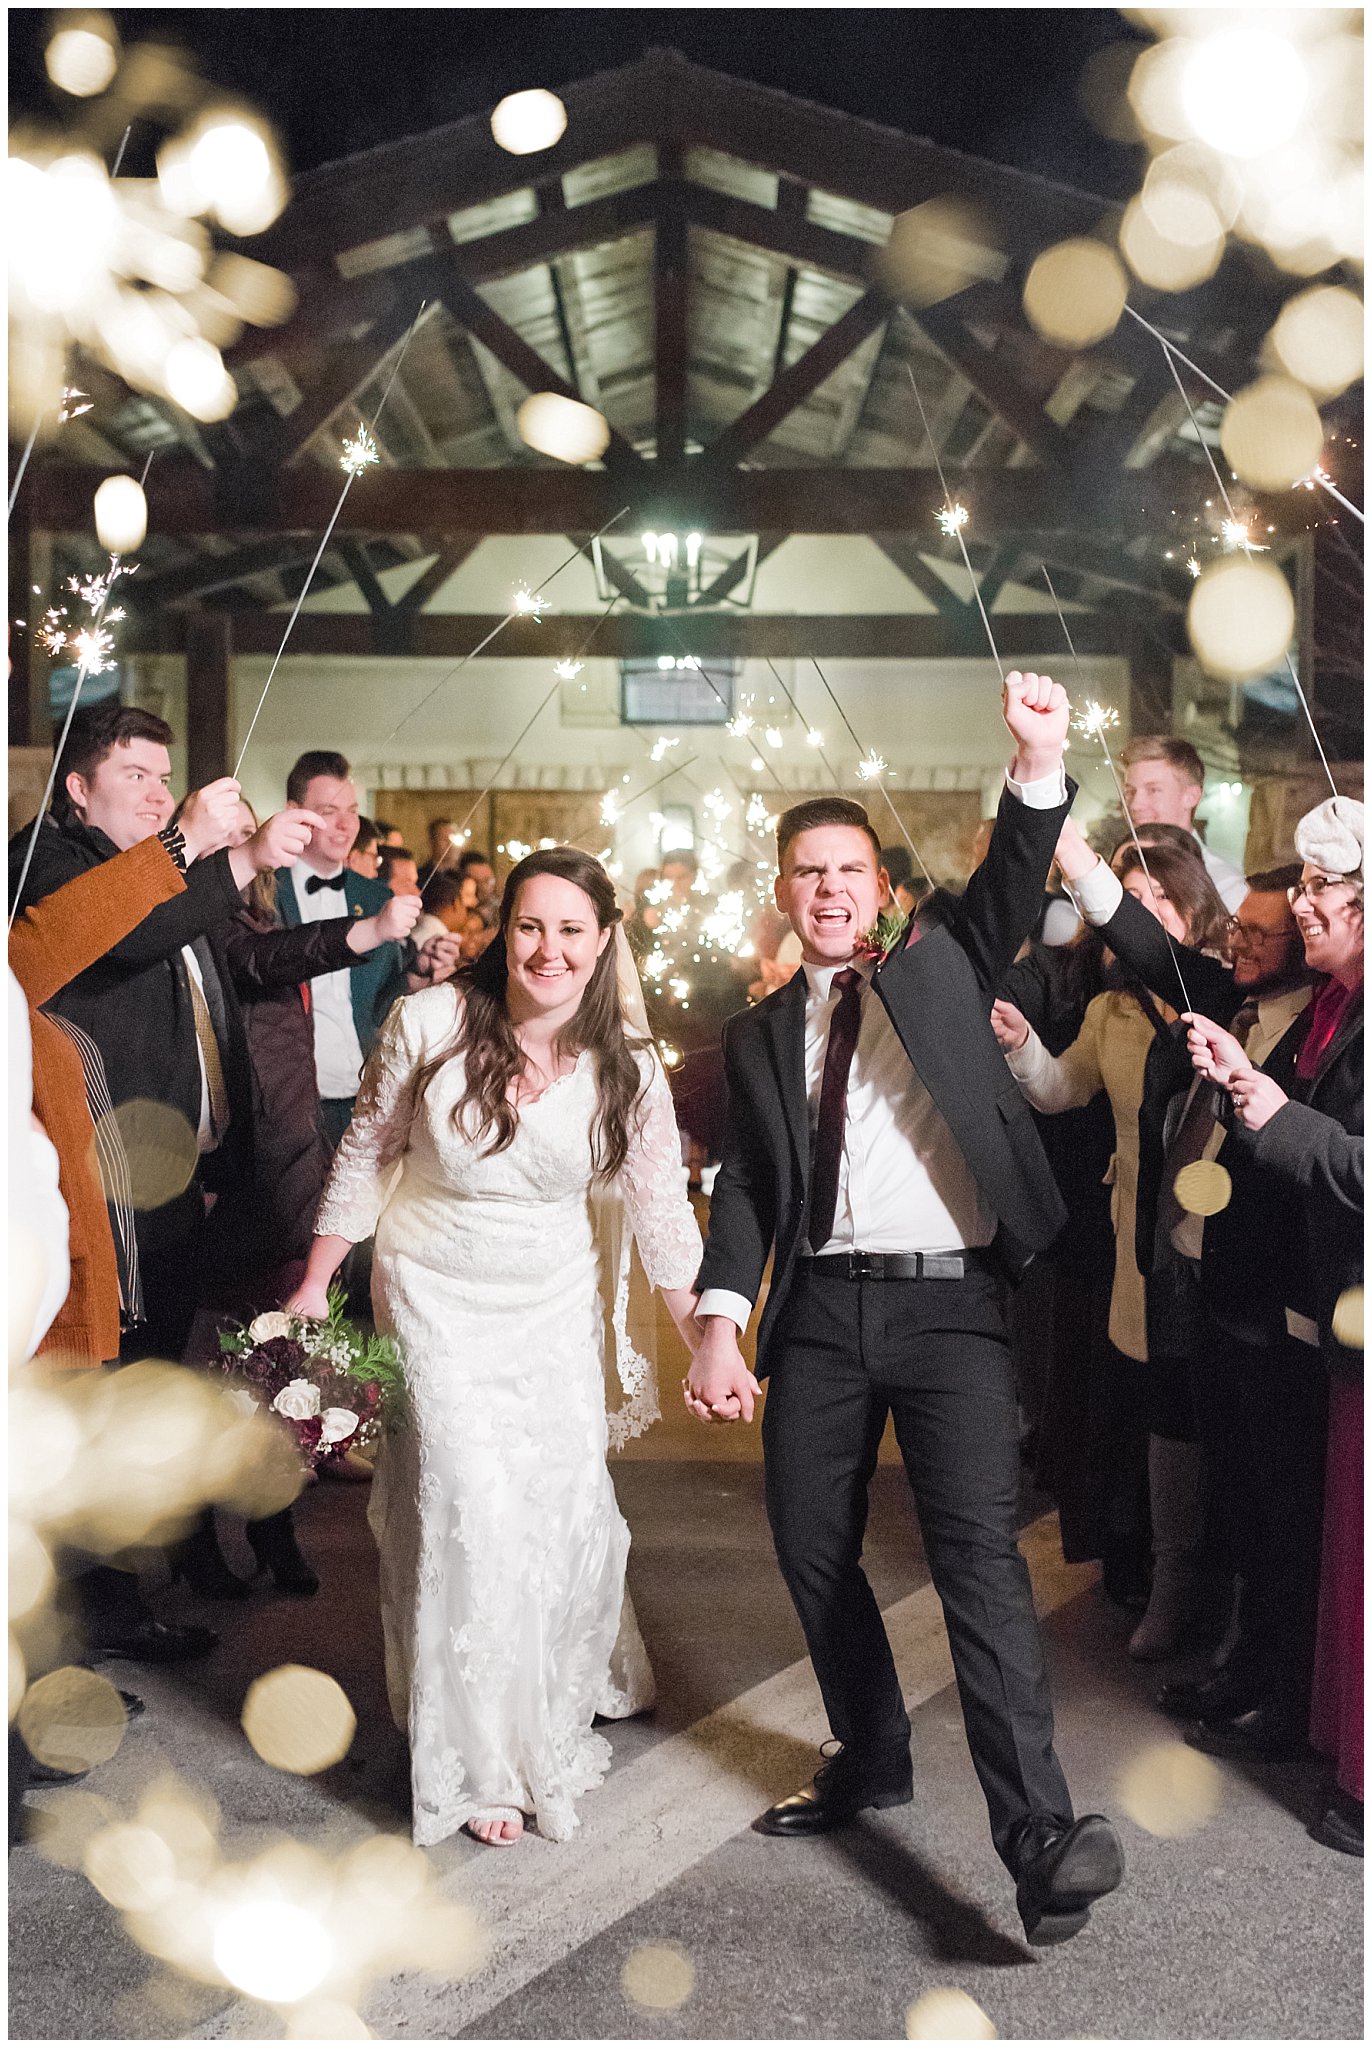 Sparkler Exit at the Gathering Place at Gardner Village | Gardner Village Wedding | The Gathering Place | Jessie and Dallin Photography